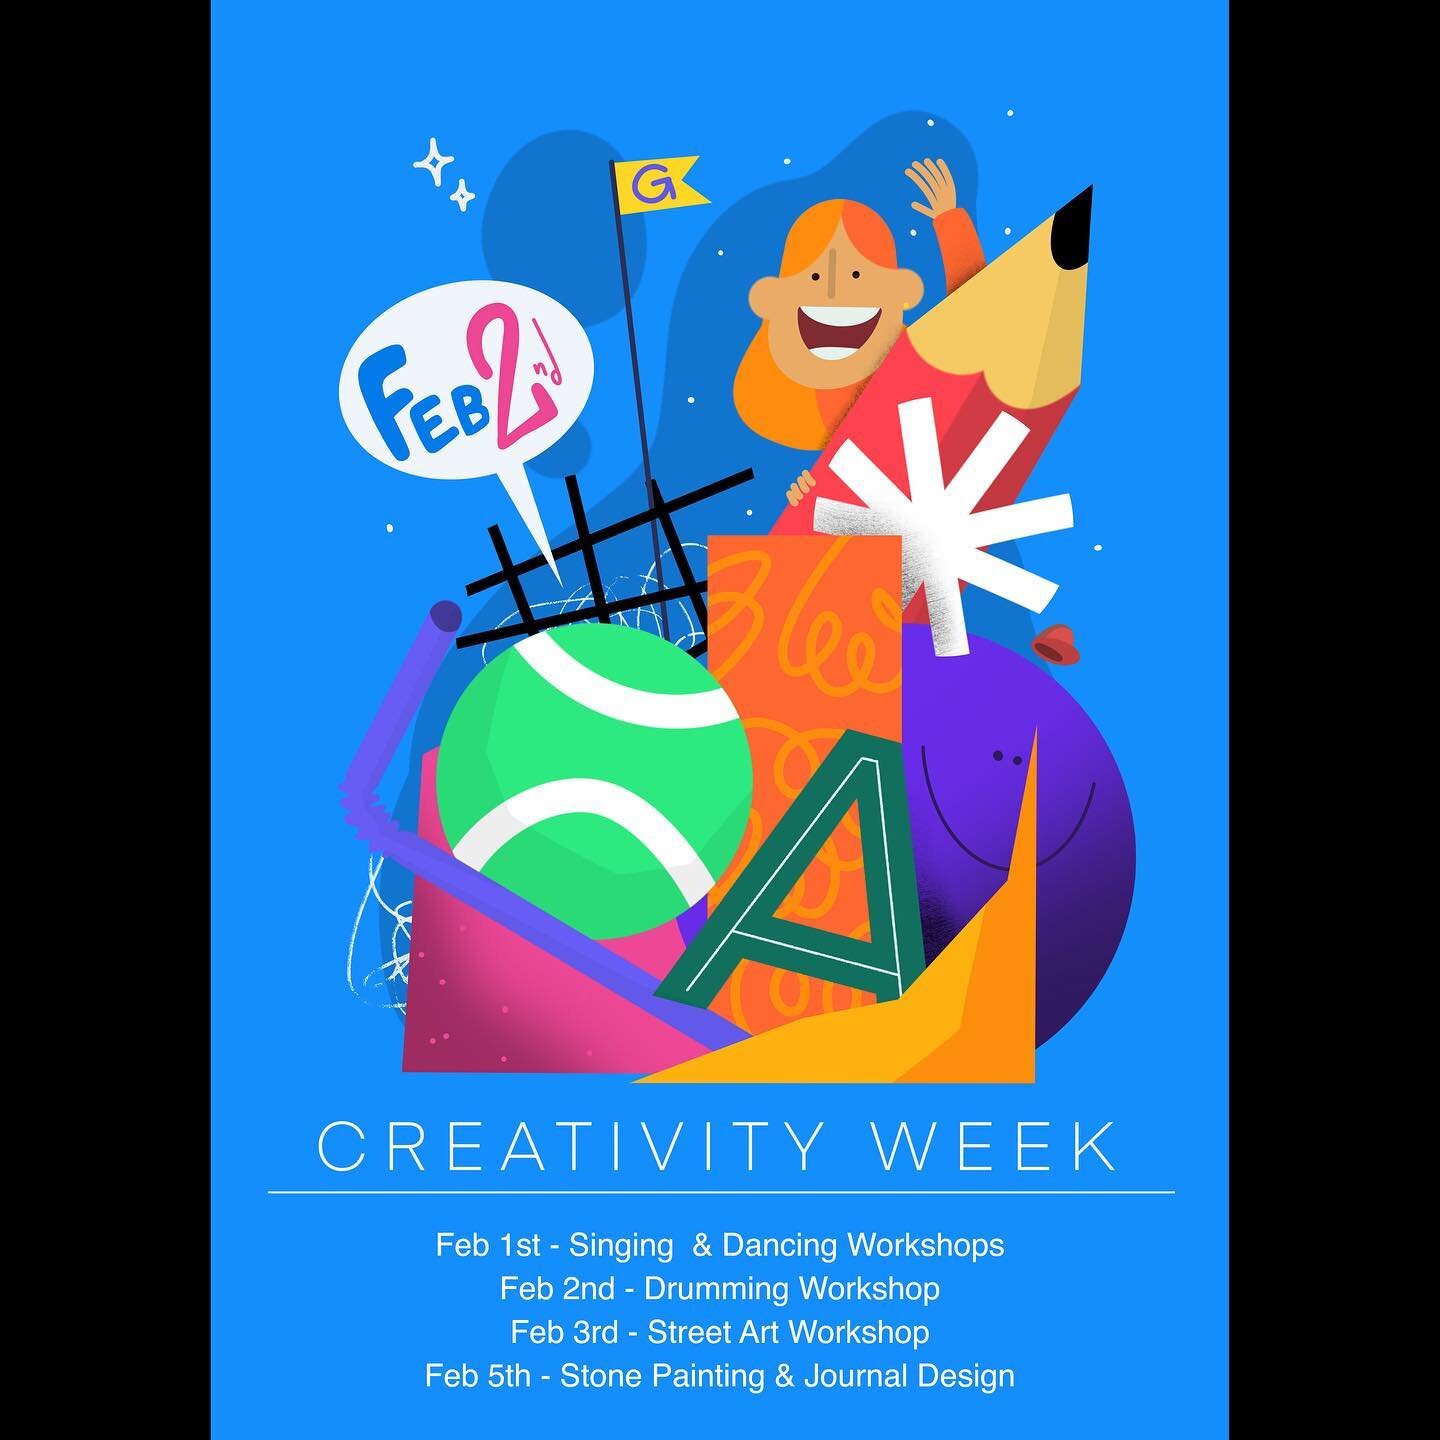 Today we are celebrating Creativity Week!
Students will be painting, dancing, singing and drumming in various workshops thought the week to help express and celebrate creativity in our school environment. 

#DublinSchools #ETSS #EducateTogetherSecond